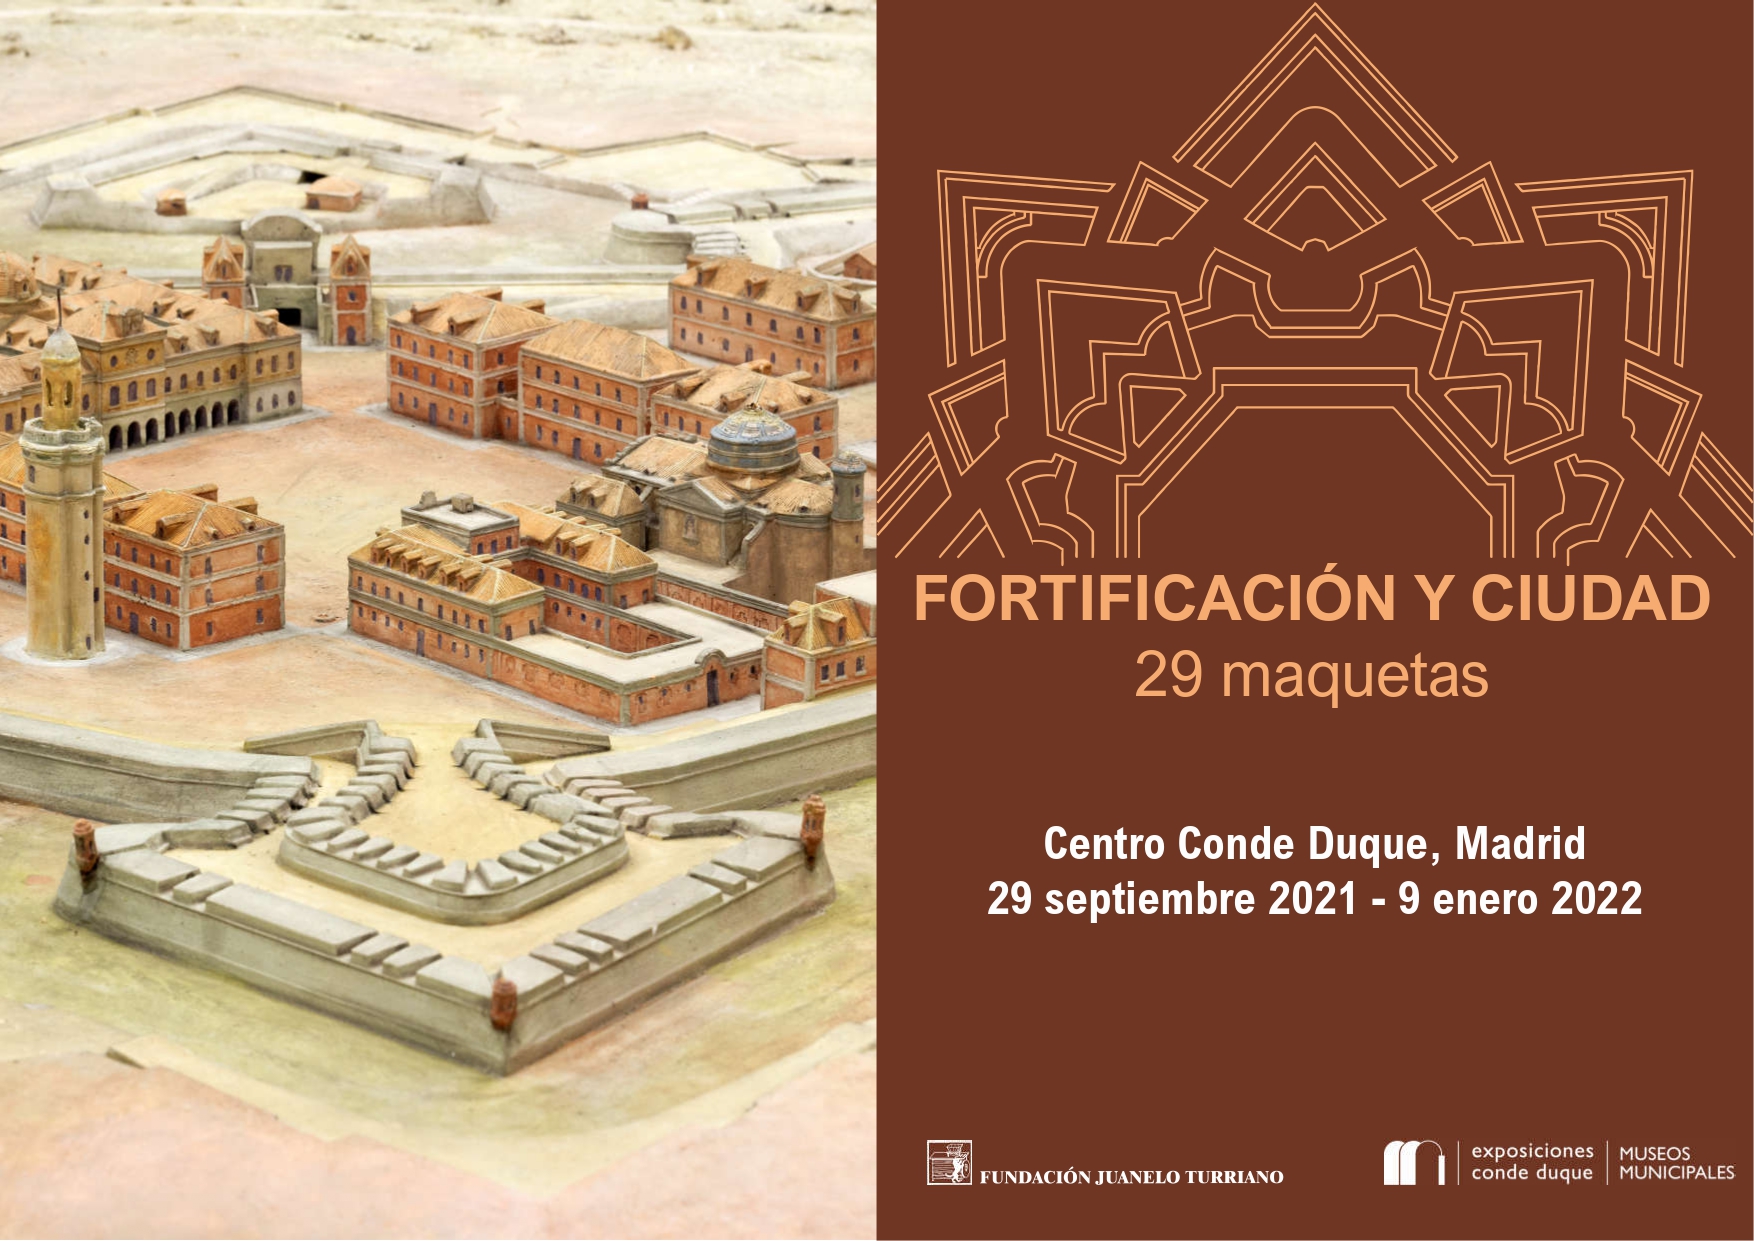 Fortress and the City. 29 scale models